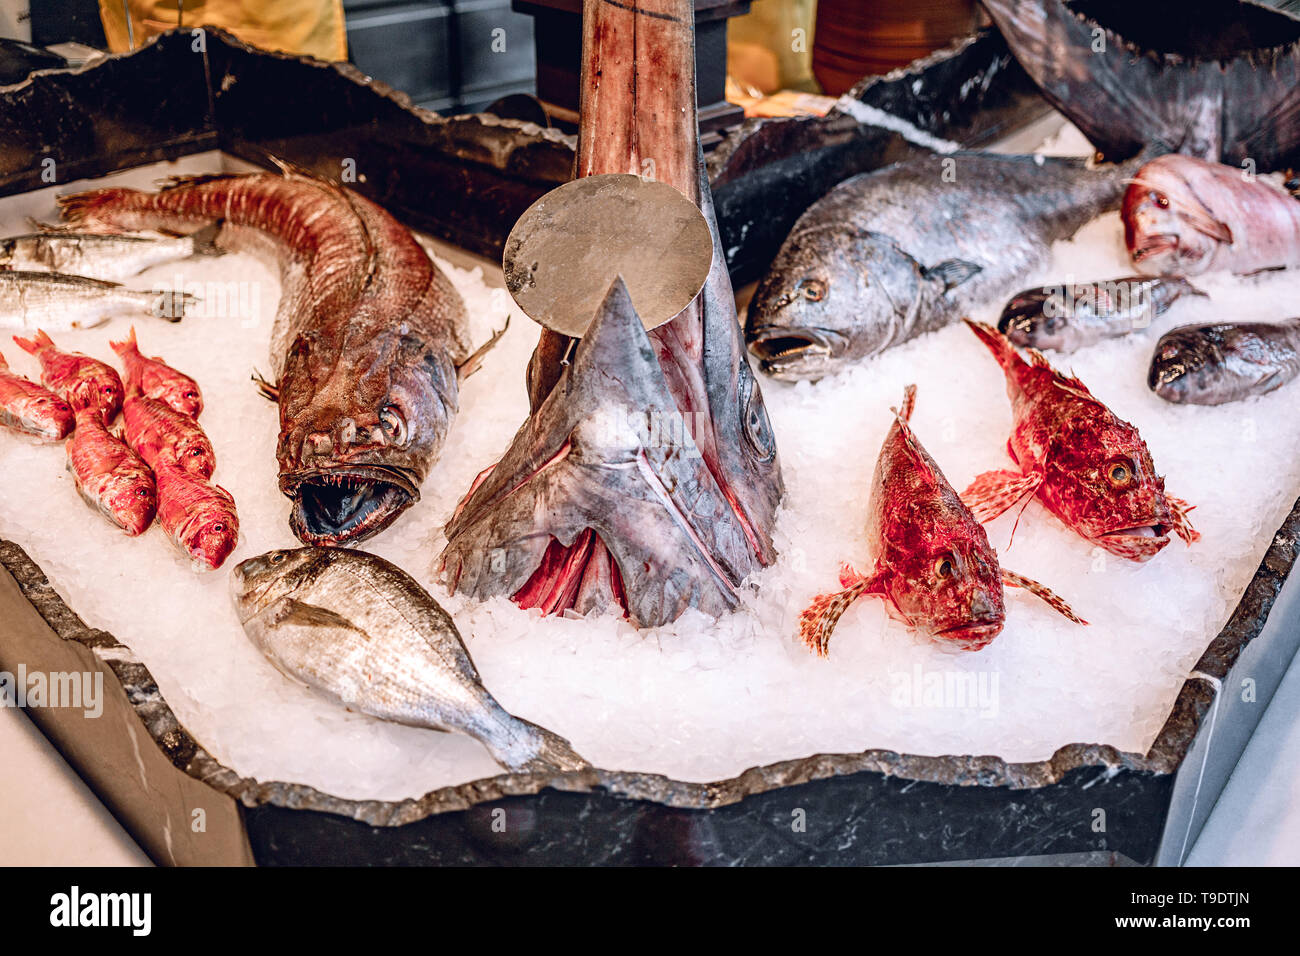 Fresh seafood on crushed ice at fish market.  Fresh fish head with open jaws. Many varieties of fresh fish and seafood - the best choice for healthy e Stock Photo